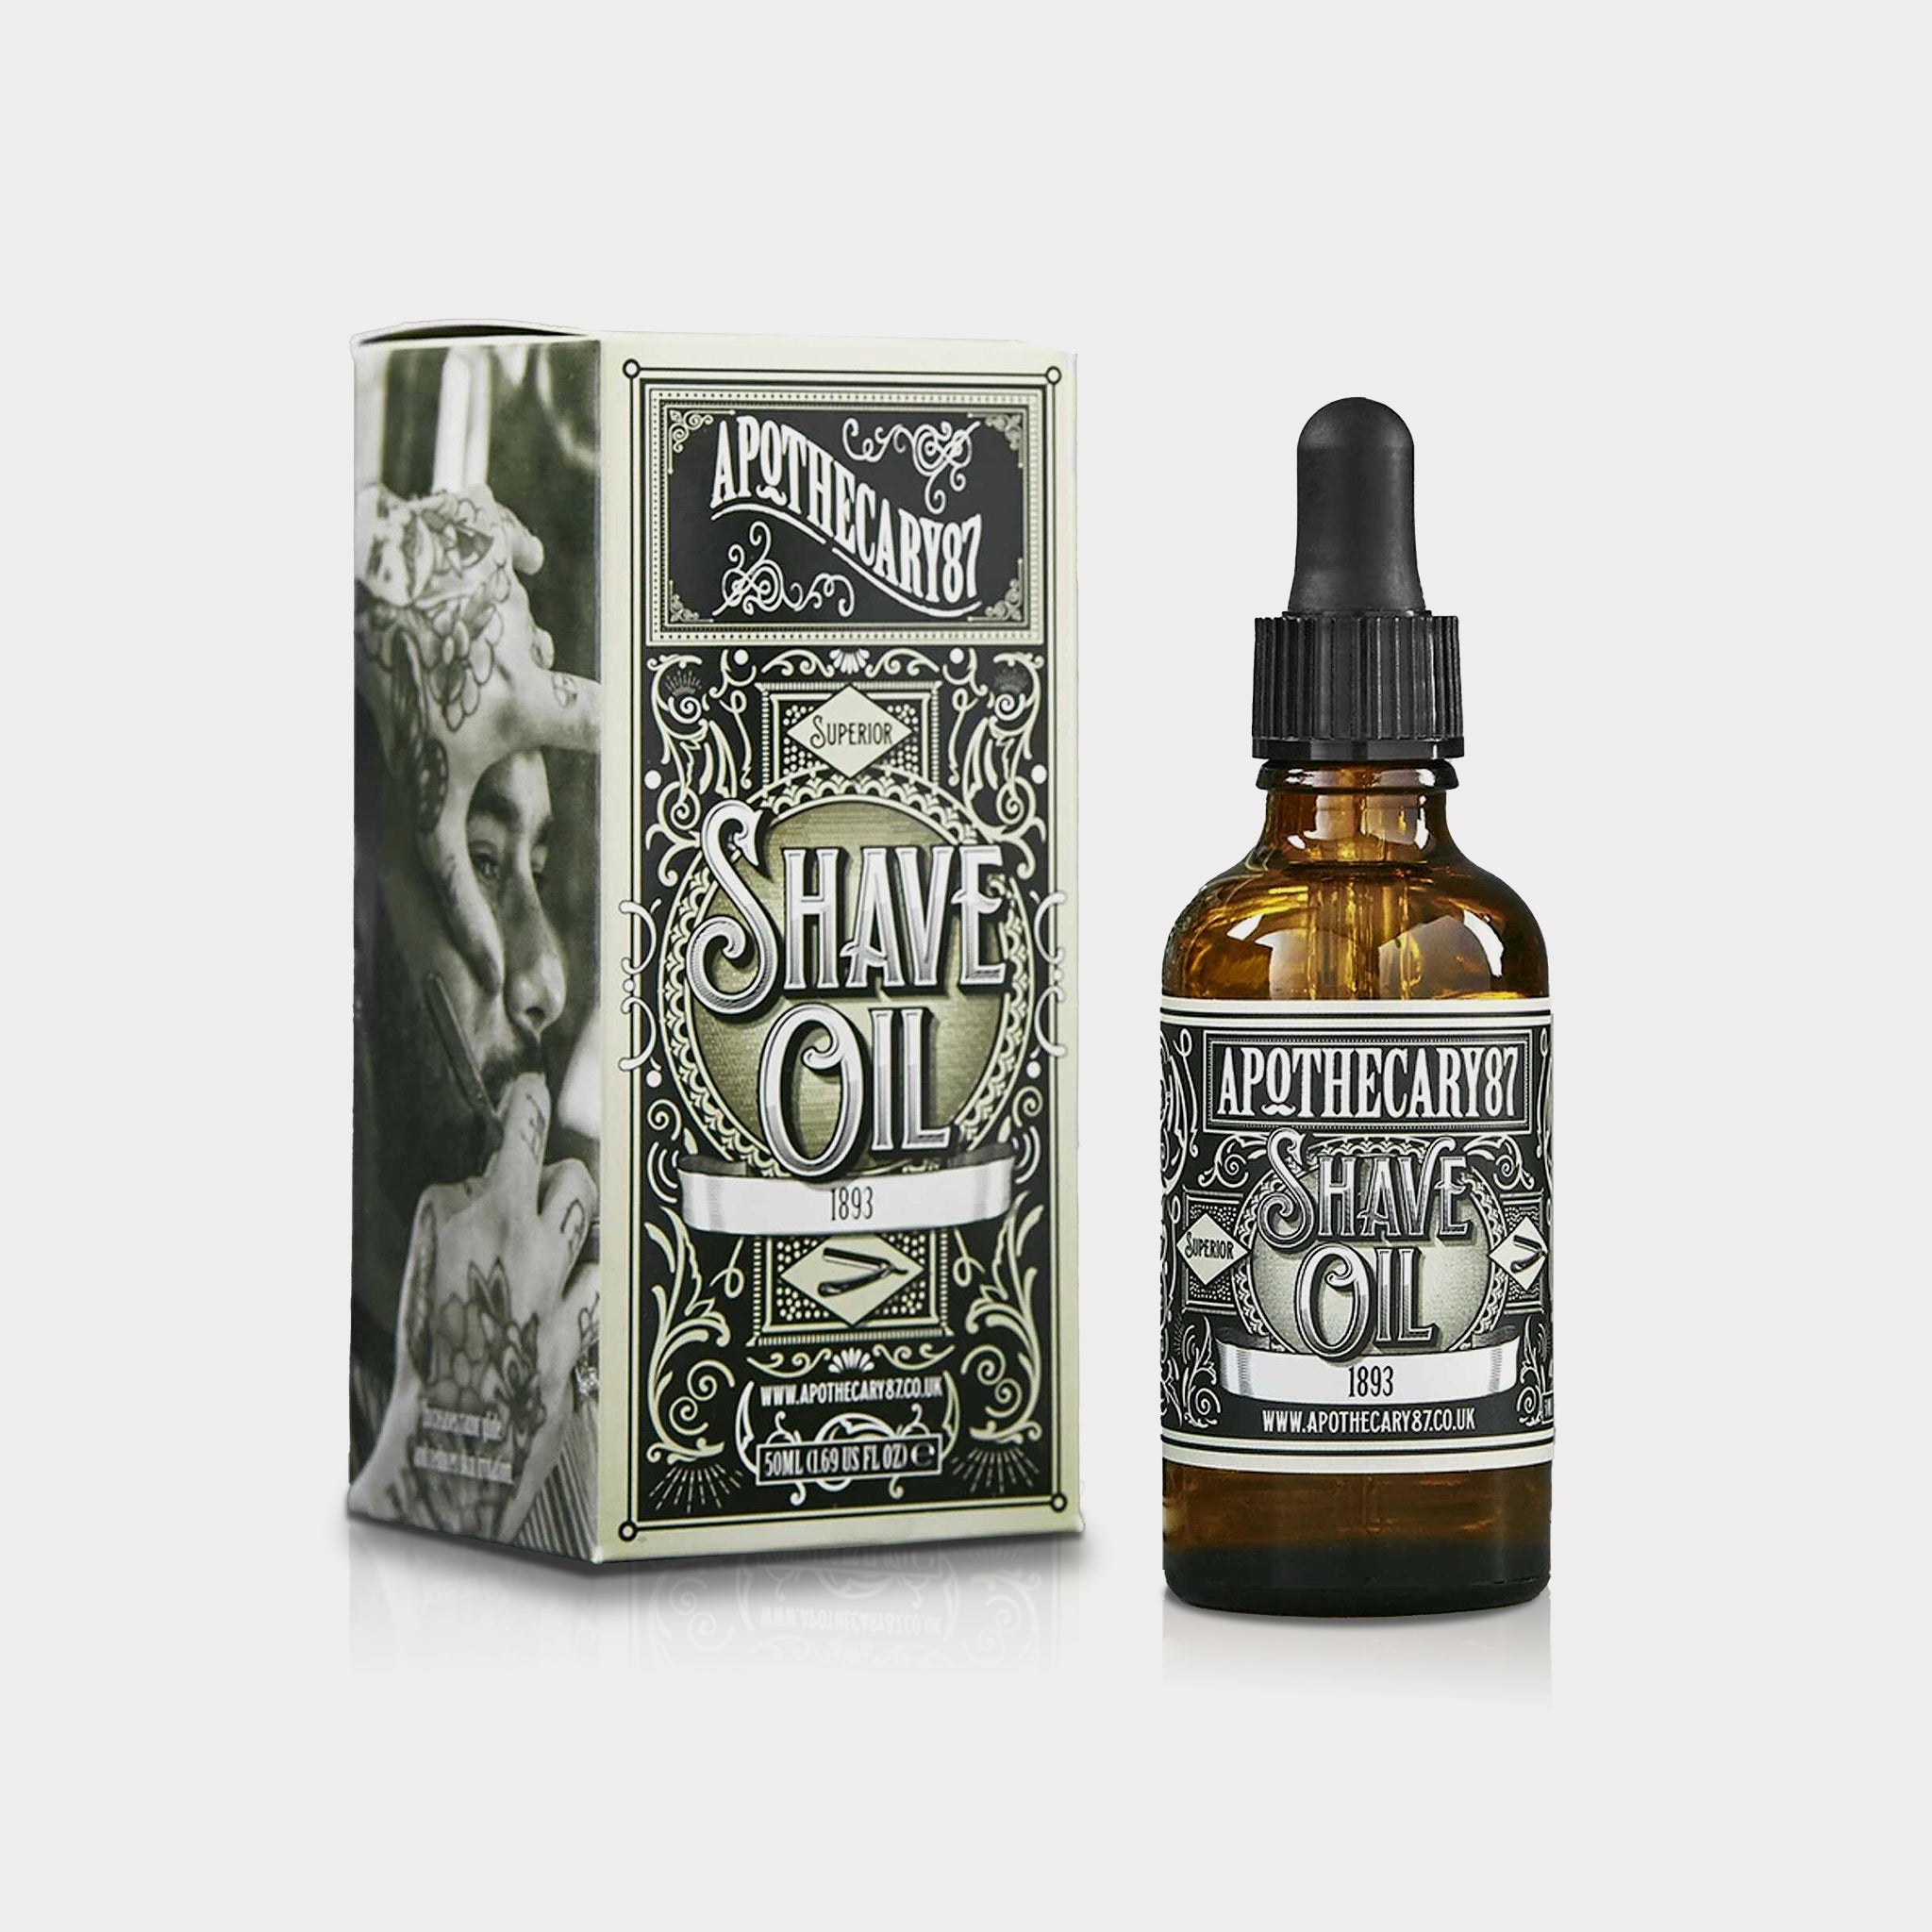 Apothecary 87 Shave Oil  50ml